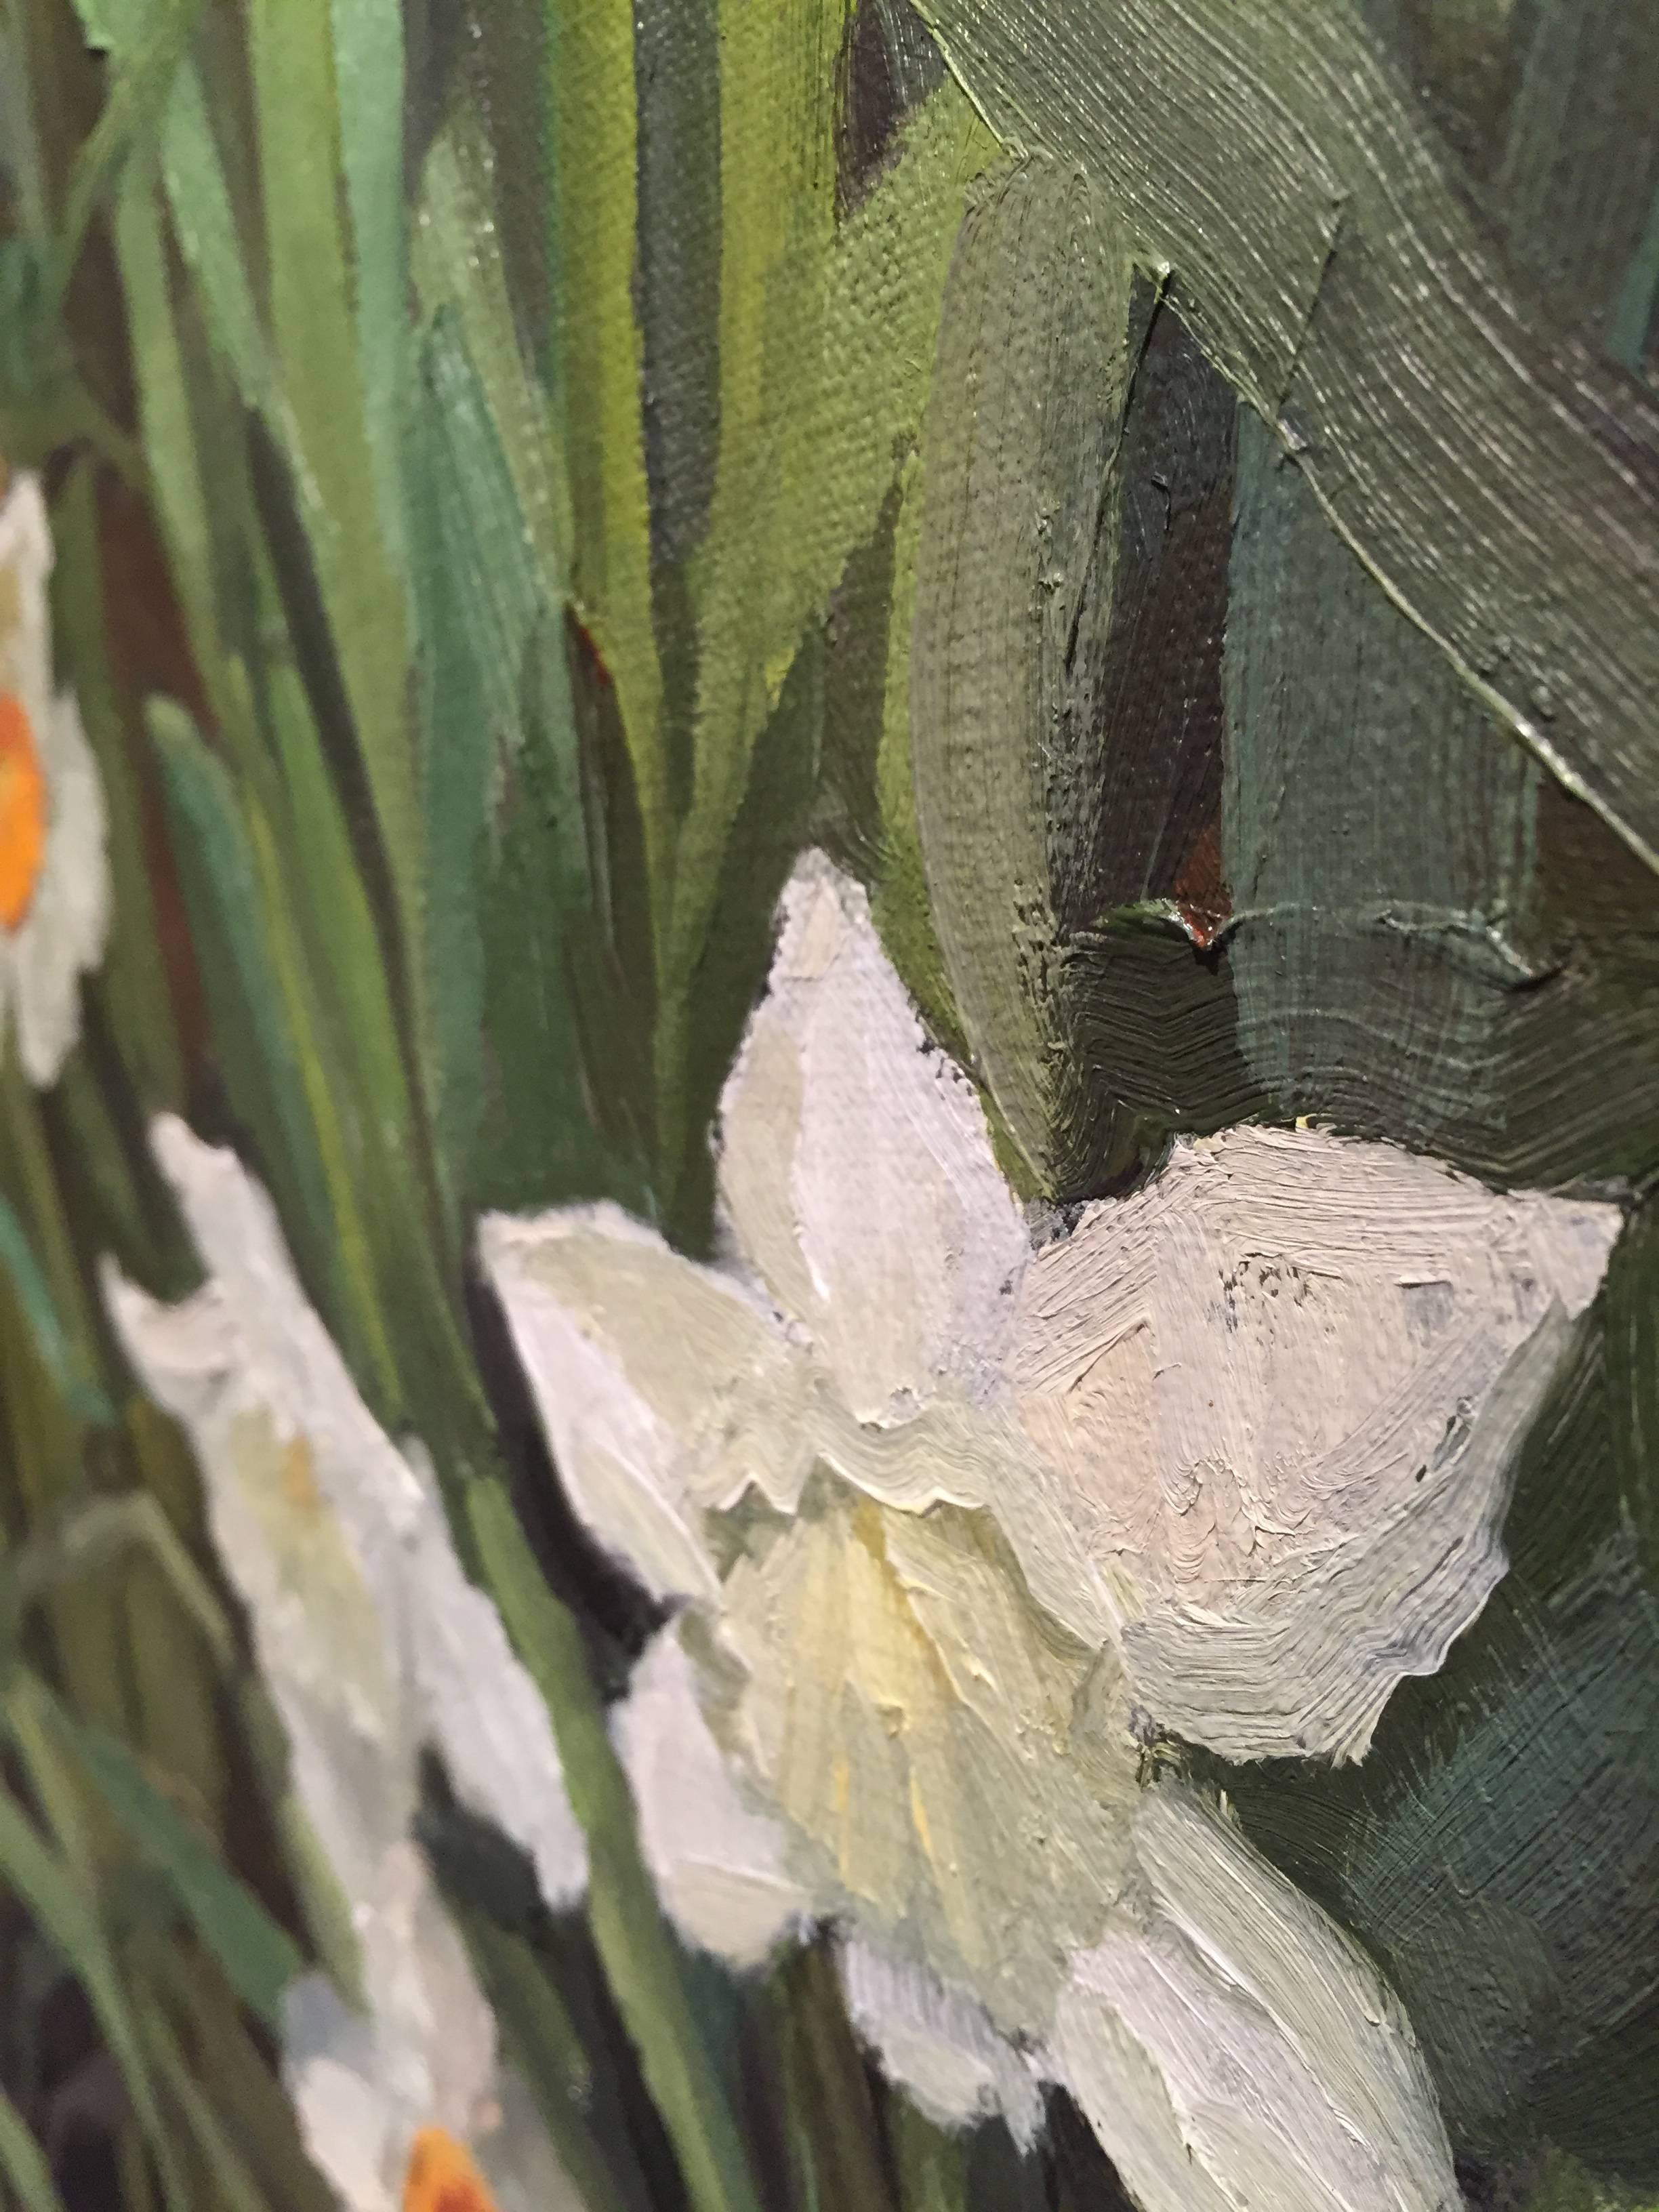 Painted from life, the flower that dictates when spring is here is immortalized in this oil on canvas painting. Young white Daffodils bloom amongst their older, more confident yellow blossoms. A Jungle of greenery weaves back and forth and